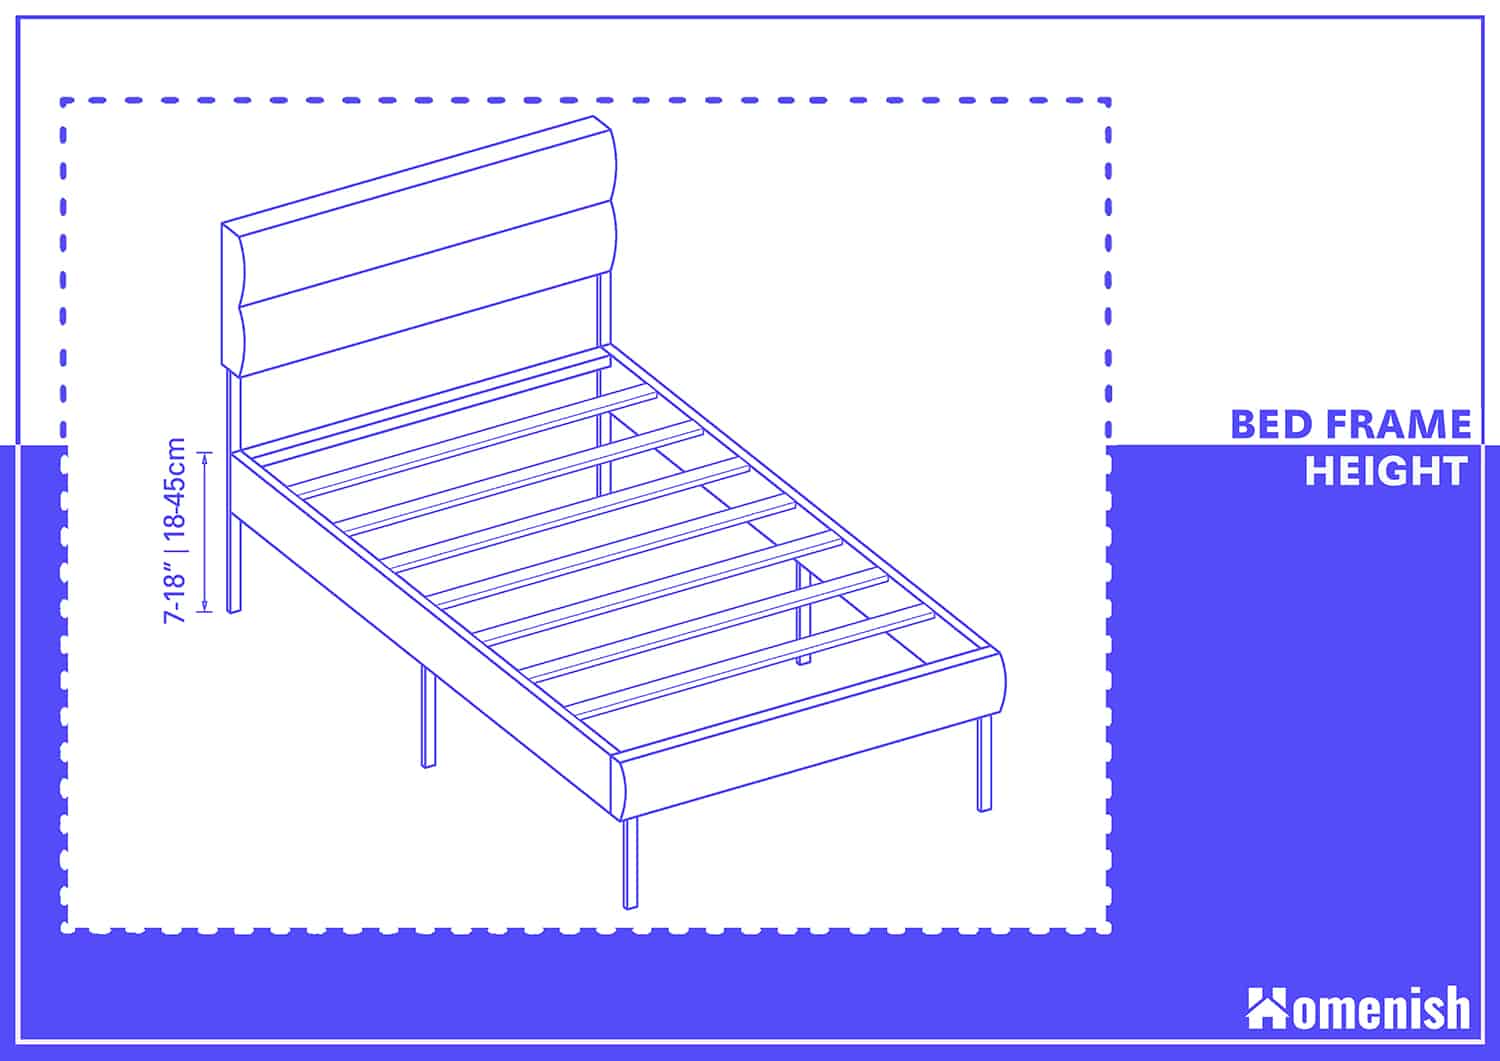 Guide To Bed Frame Dimension With, What Is The Size Of A Standard Double Bed Frame